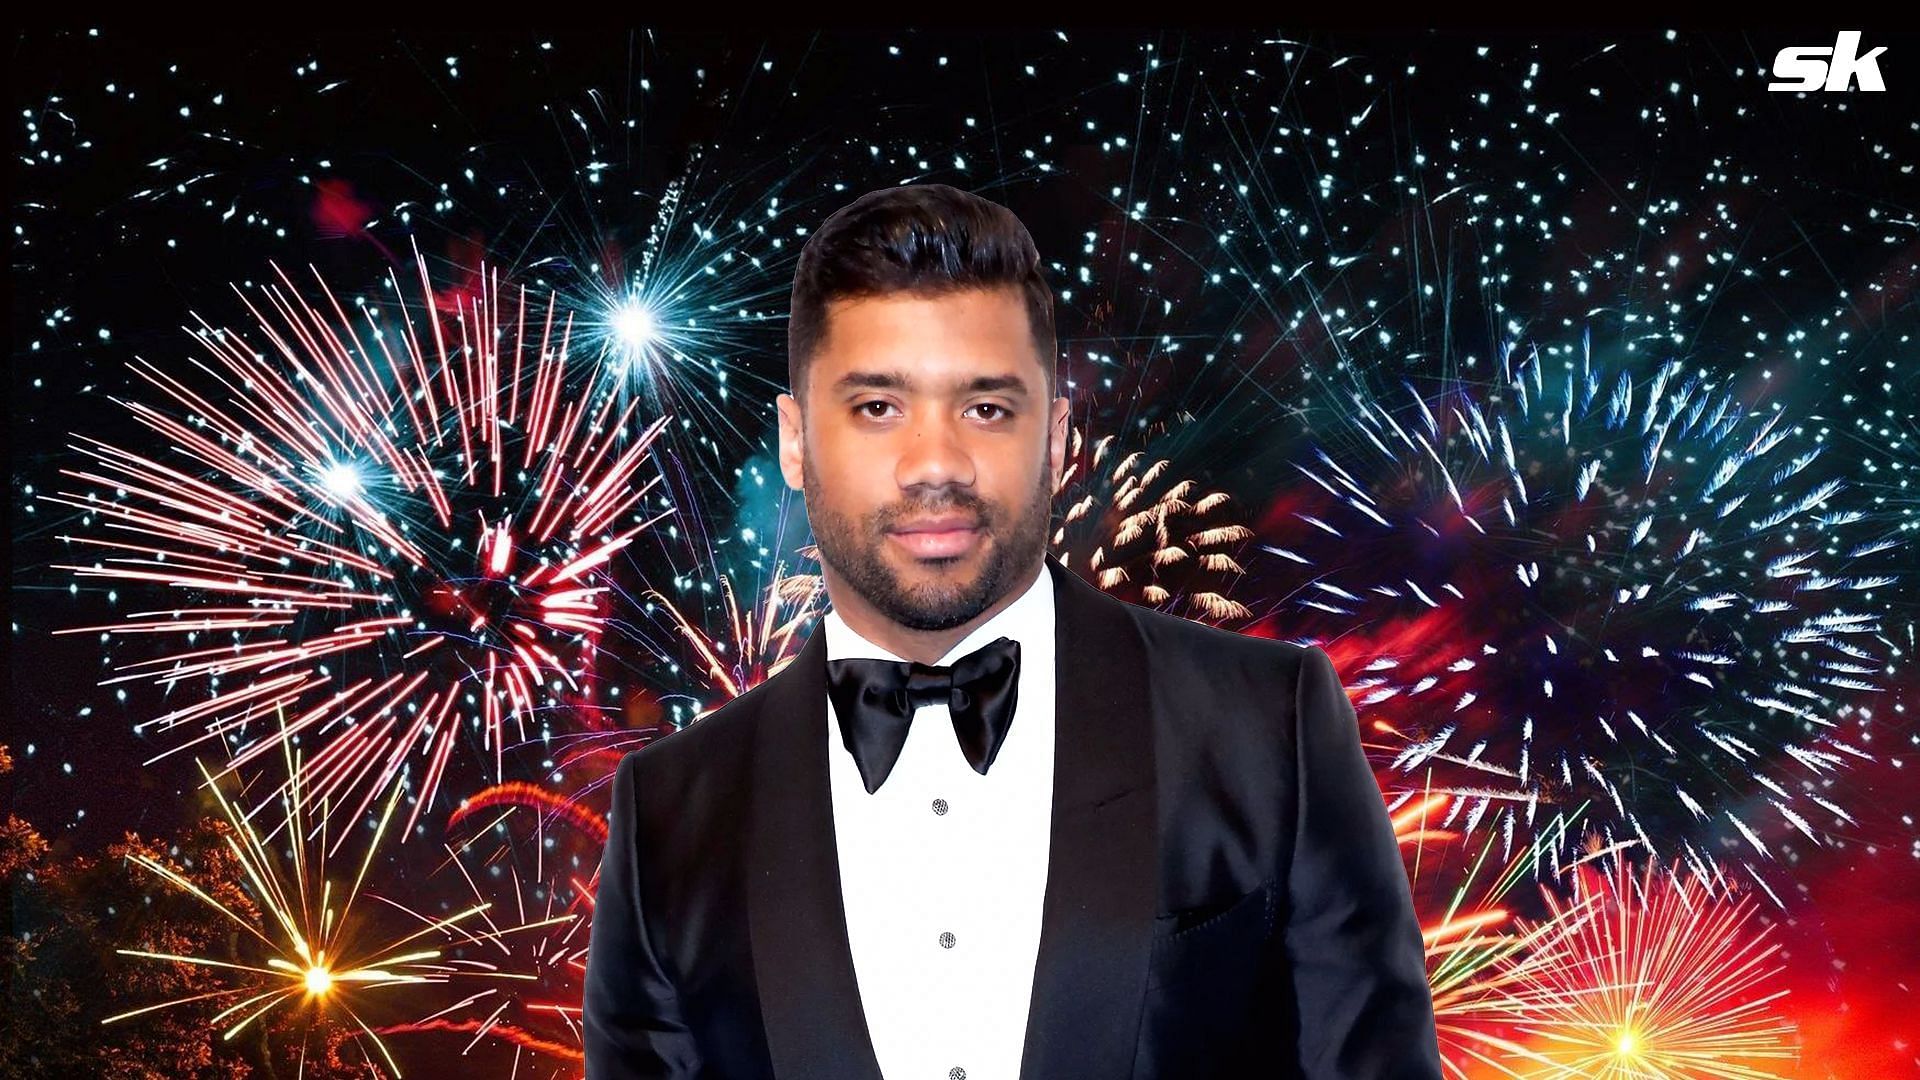 Russell Wilson celebrates 4th of July